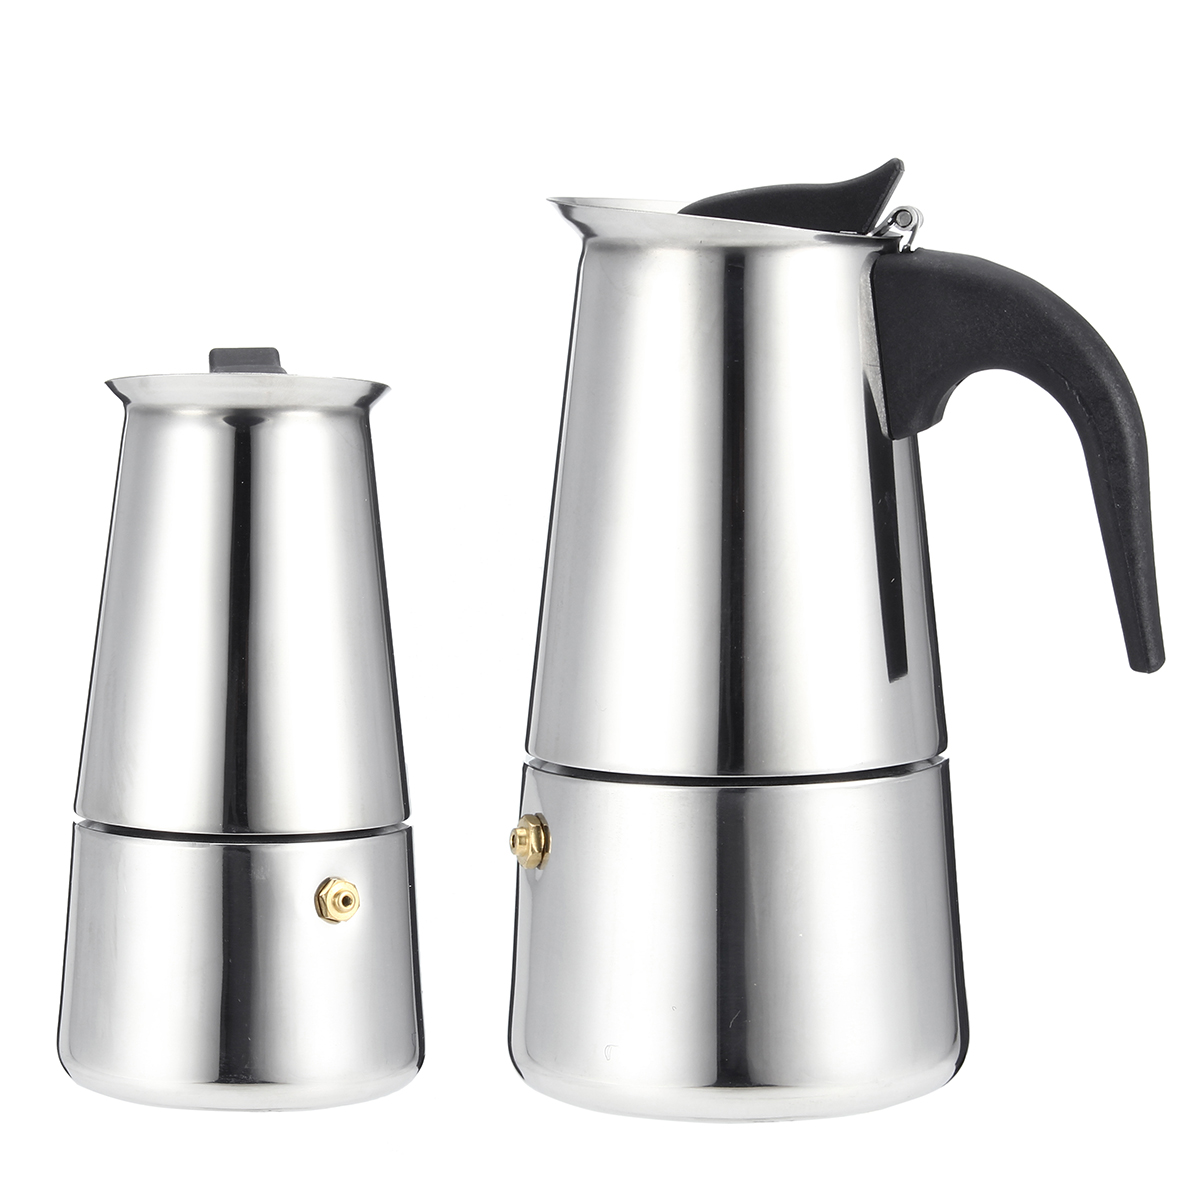 Espresso Moka Coffee Maker Pot Percolator Stainless Steel Electric Stove Electric Coffee Kettle 15